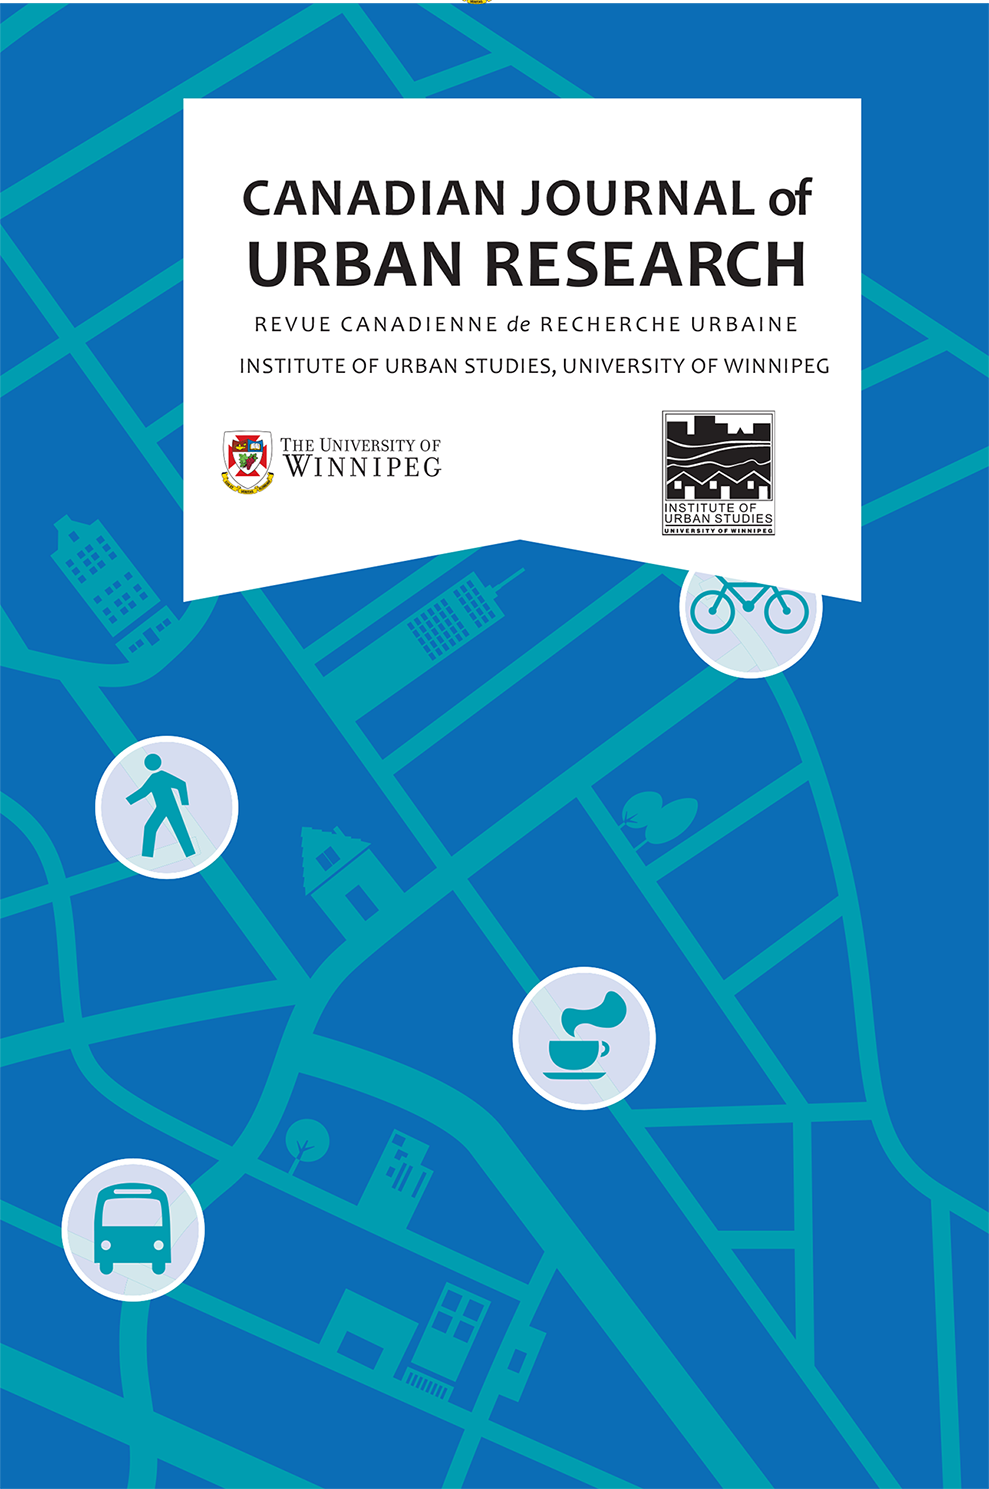 					View Vol. 28 No. 1 (2019): Canadian Journal of Urban Research - Summer 2019 Issue
				